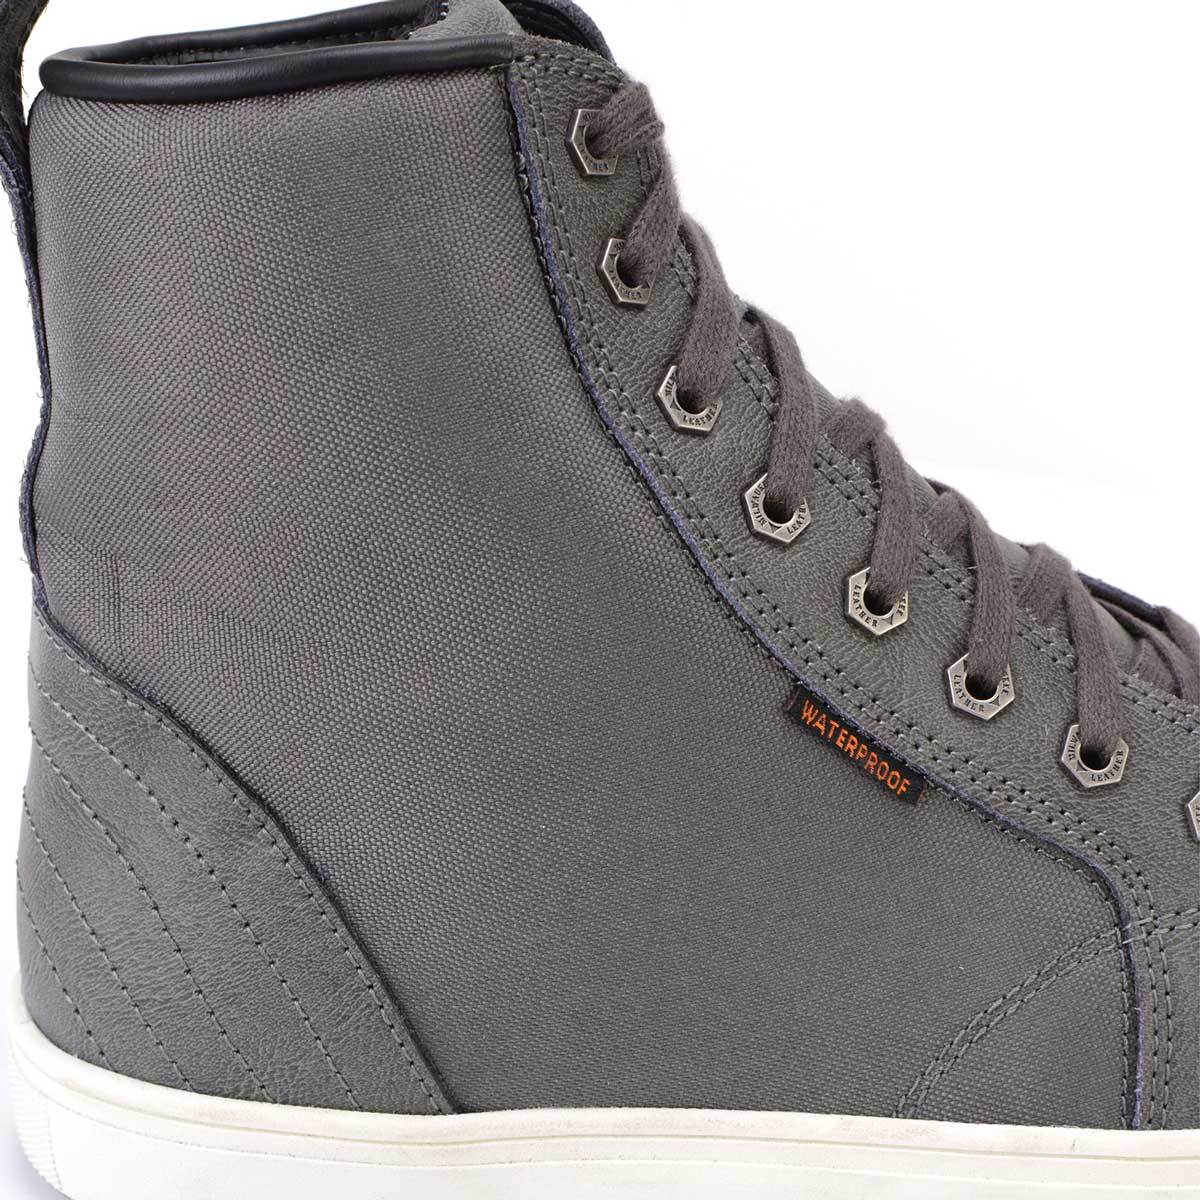 Milwaukee Leather MBM9003WP Men's Grey Leather and Canvas Reinforced Street Riding Waterproof Shoes with Ankle Support